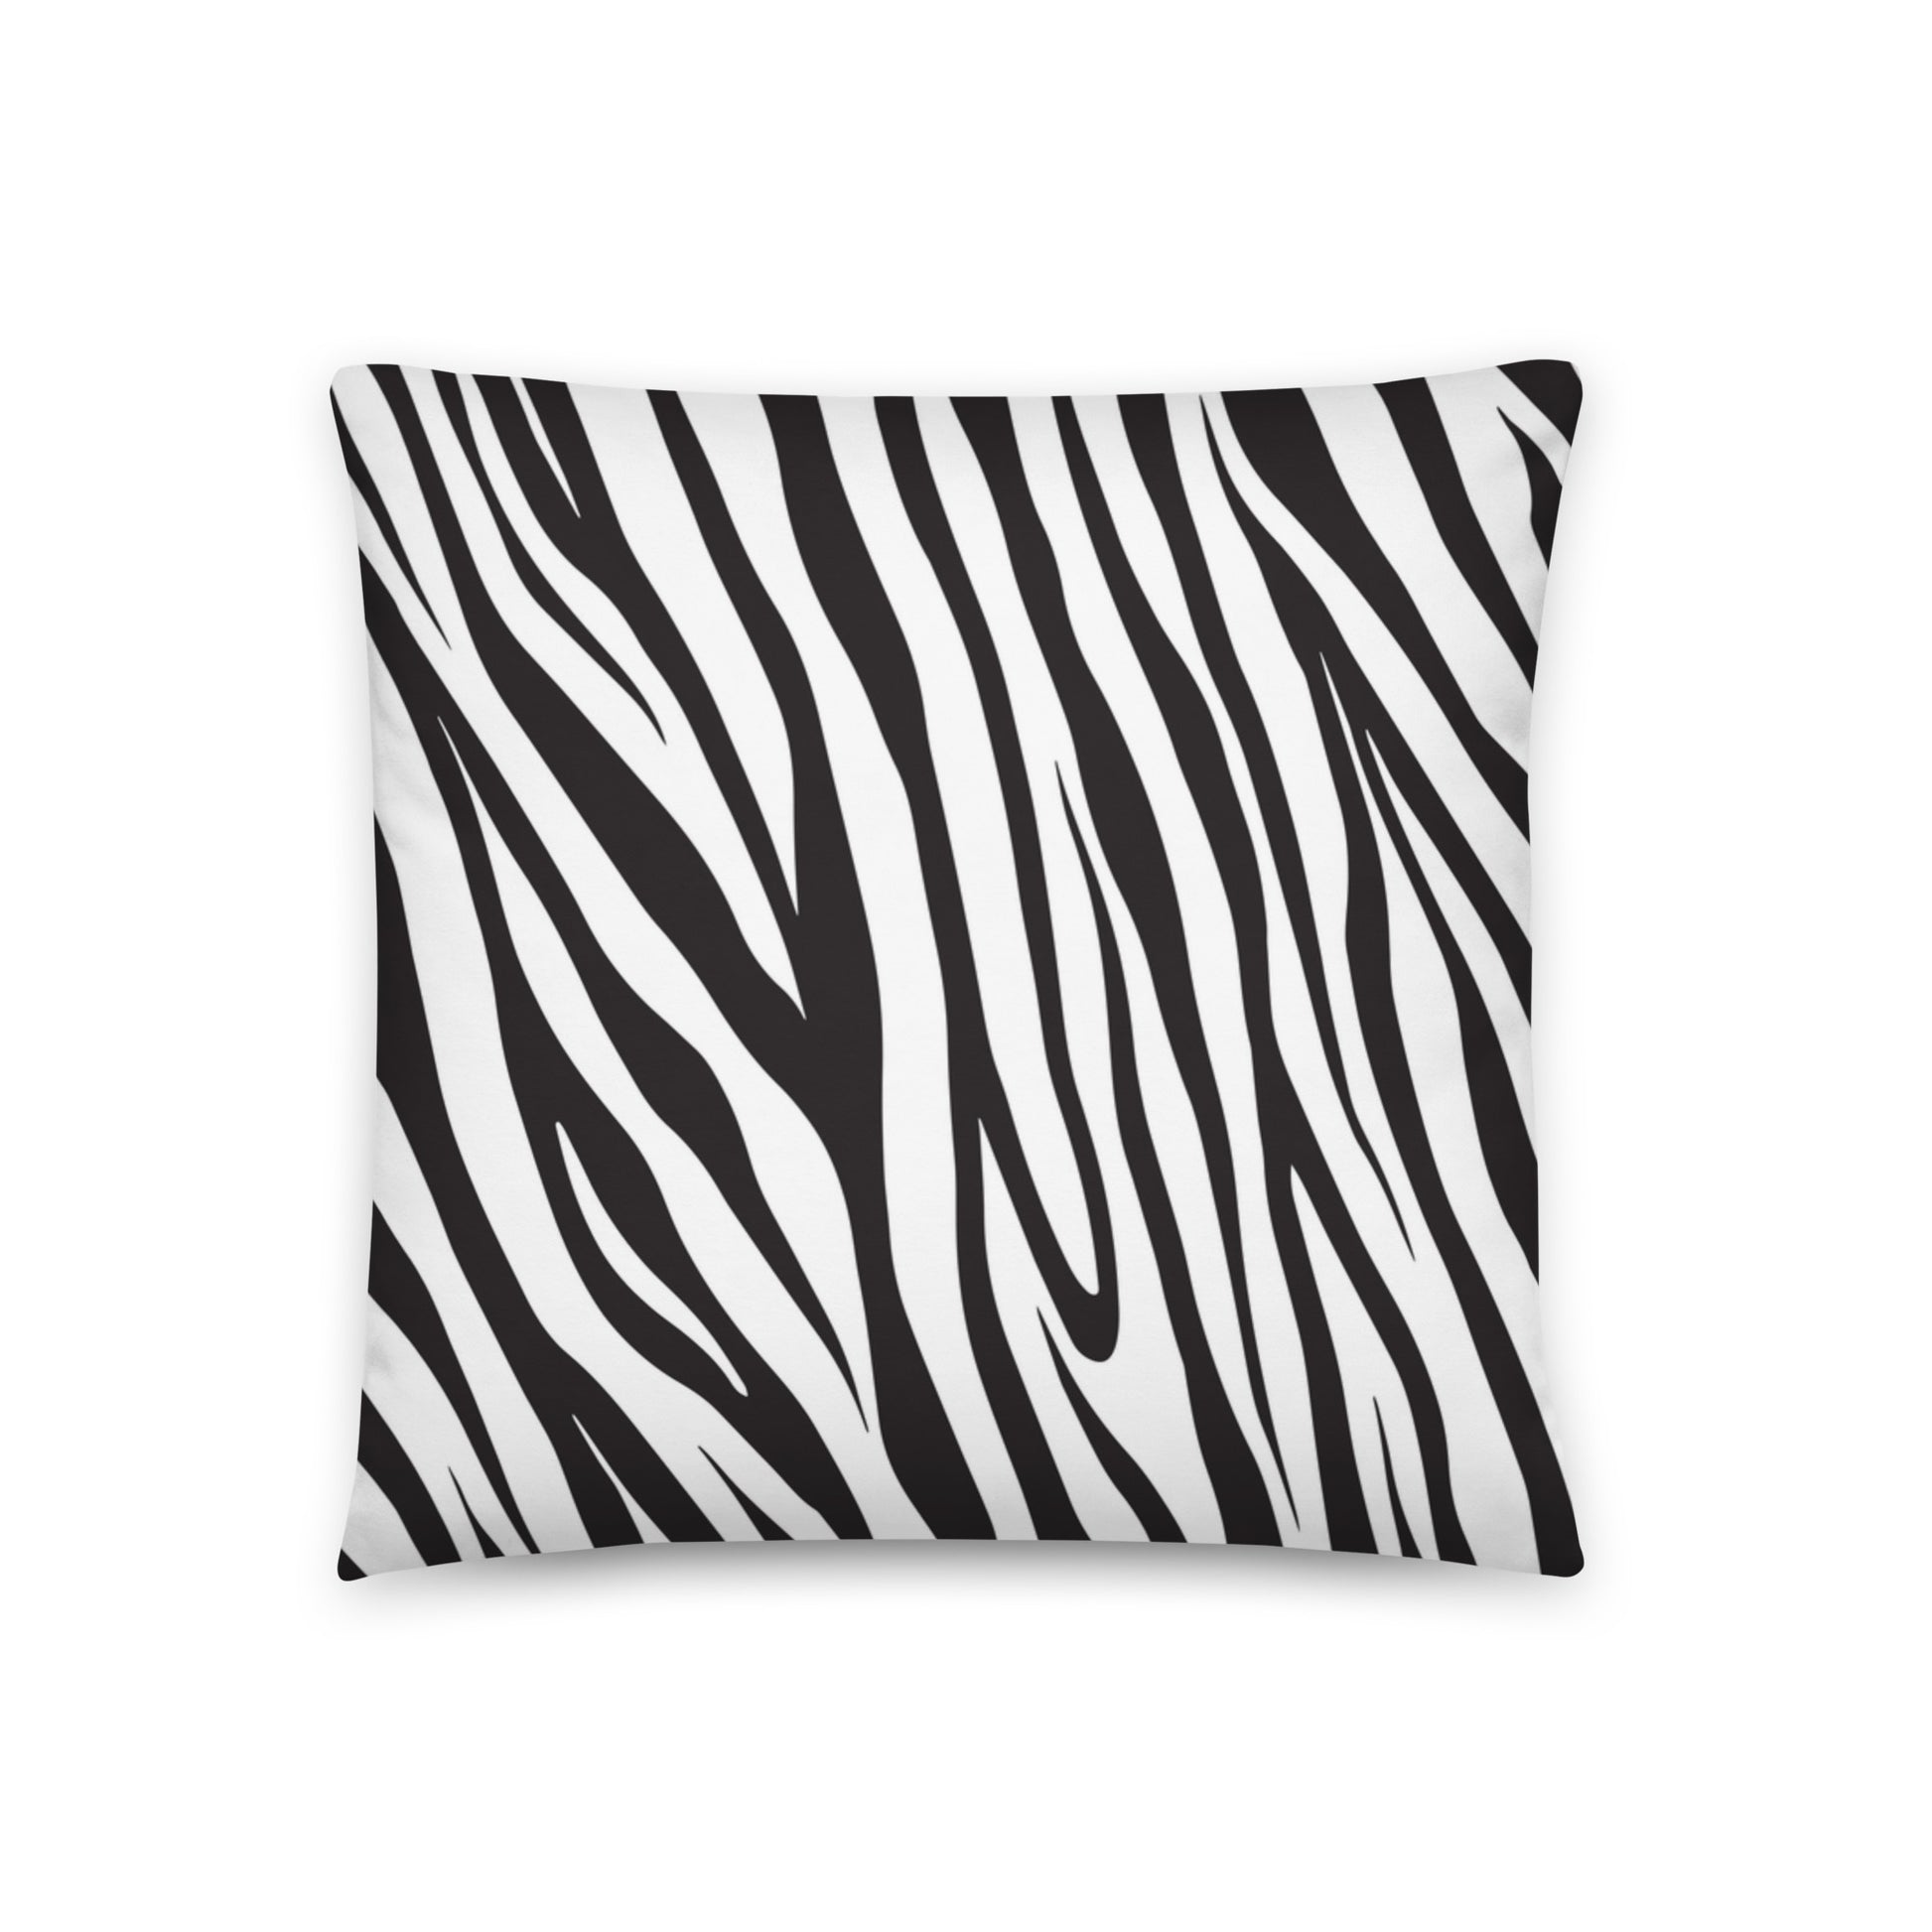 cushion cover features a striking zebra print pattern